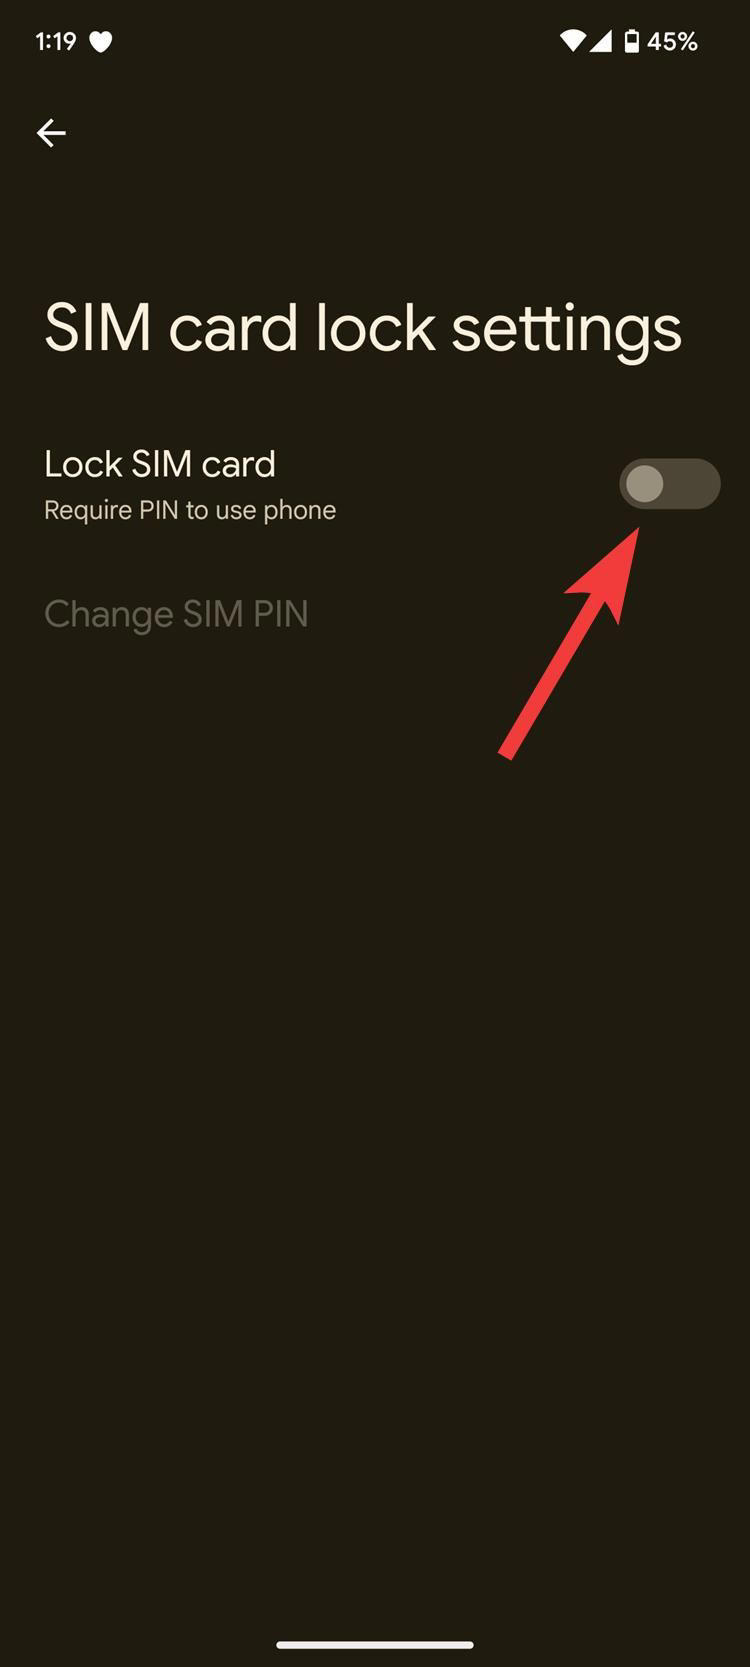 SIM card lock settings on a Google Pixel phone with a red arrow pointing to the Lock SIM card toggle